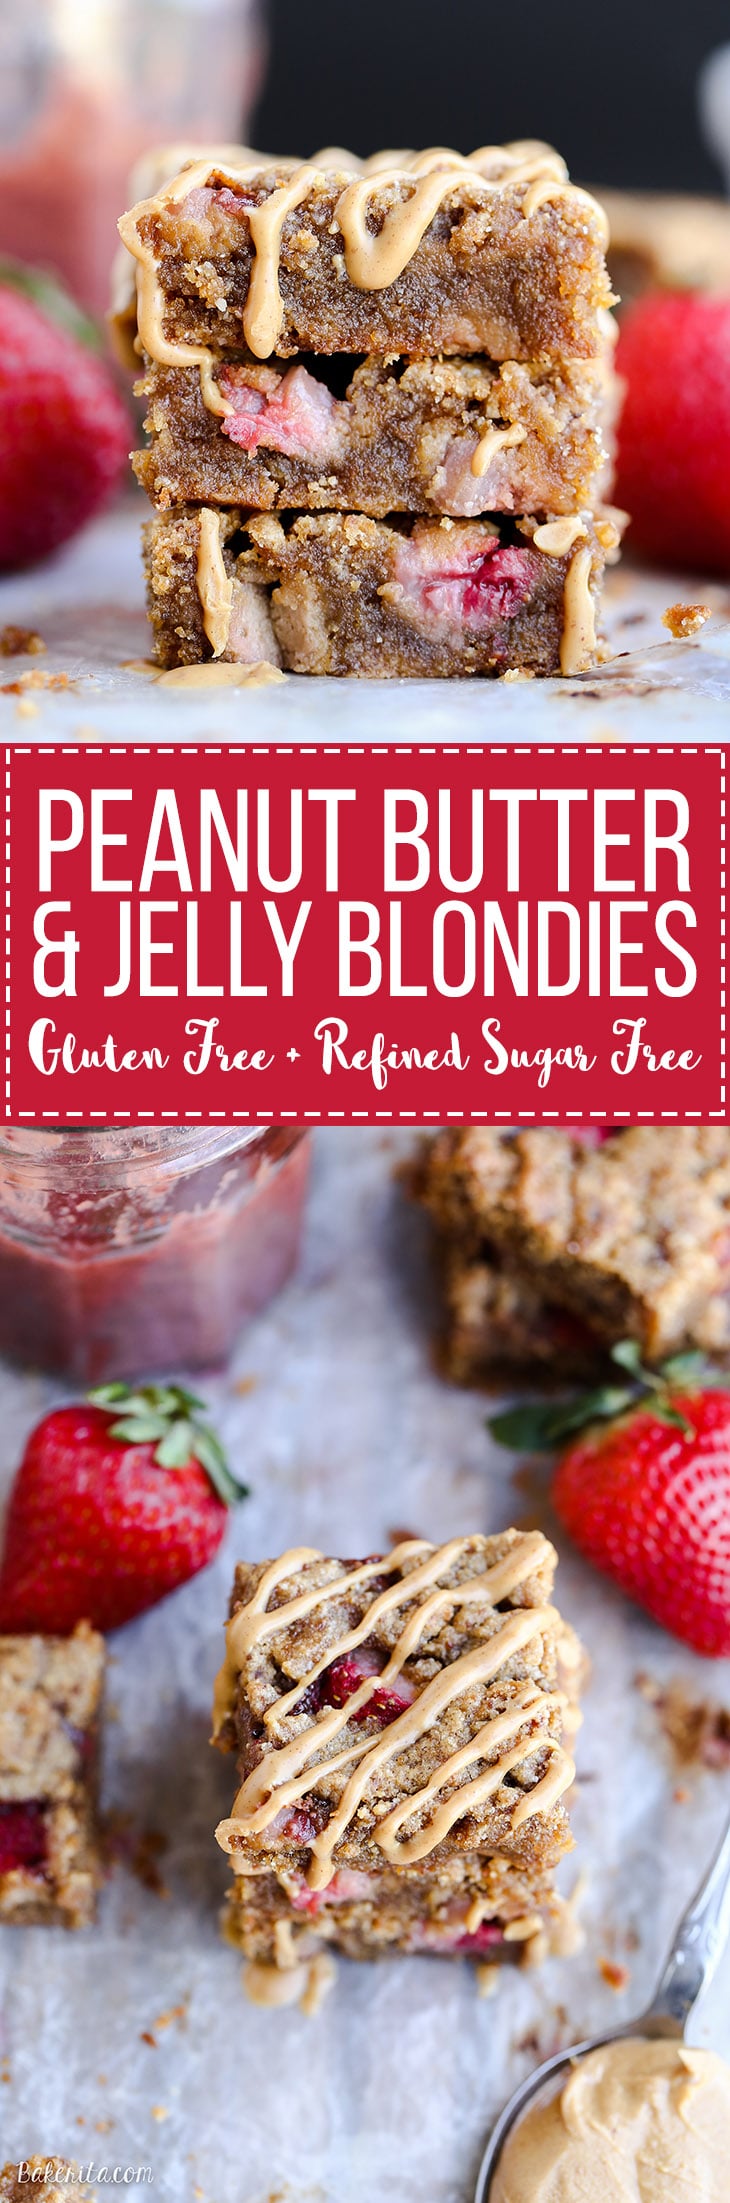 These Peanut Butter & Jelly Blondies are a super gooey and delicious way to enjoy this classic sandwich combo! These dessert bars are gluten-free, grain-free and refined sugar-free.